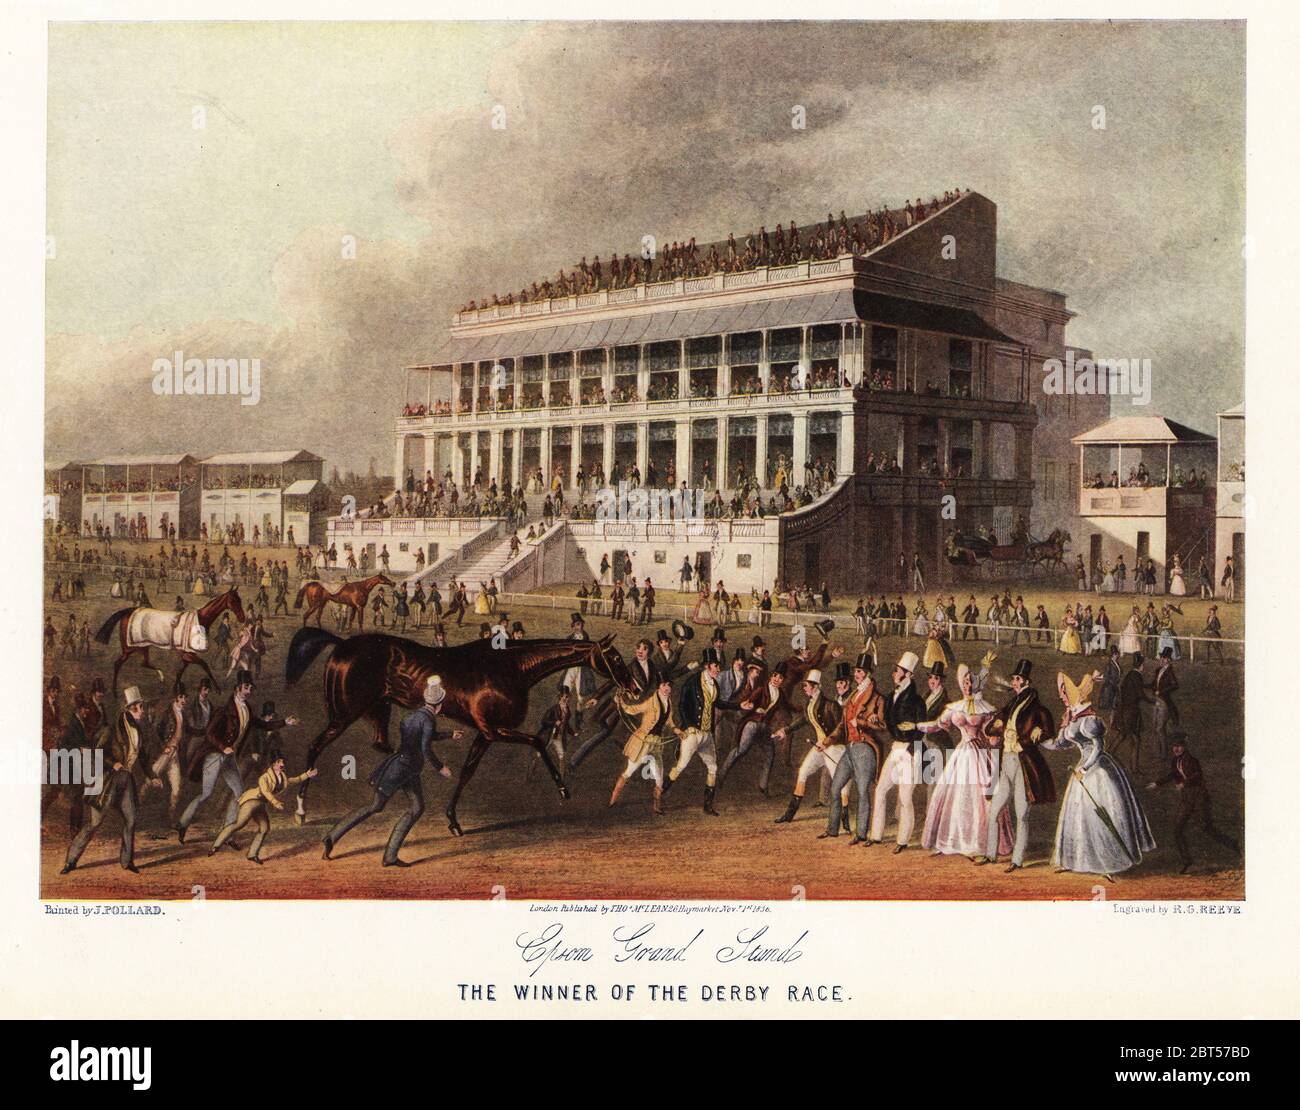 Bay Middleton, winner of the Derby 1836, being led to the paddock at Epsom Racecourse in front of fashionable crowds in the Grand Stand. Color print after an engraving by R.G. Reeve from a painting by James Pollard in Ralph Nevills Old Sporting Prints, The Connoisseur Magazine, London, 1908. Stock Photo